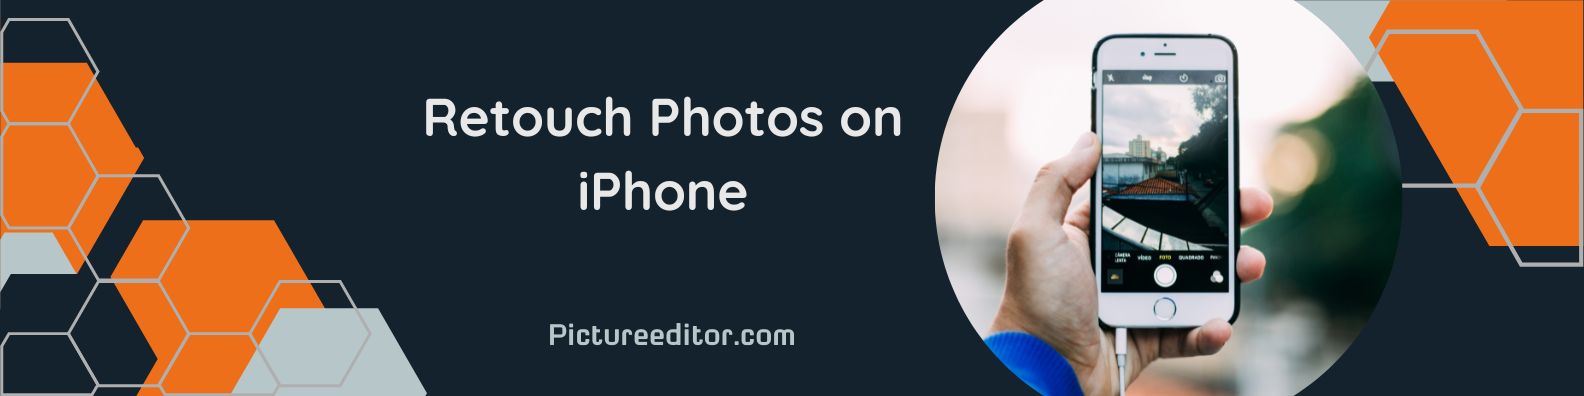 Retouch Photos on iPhone